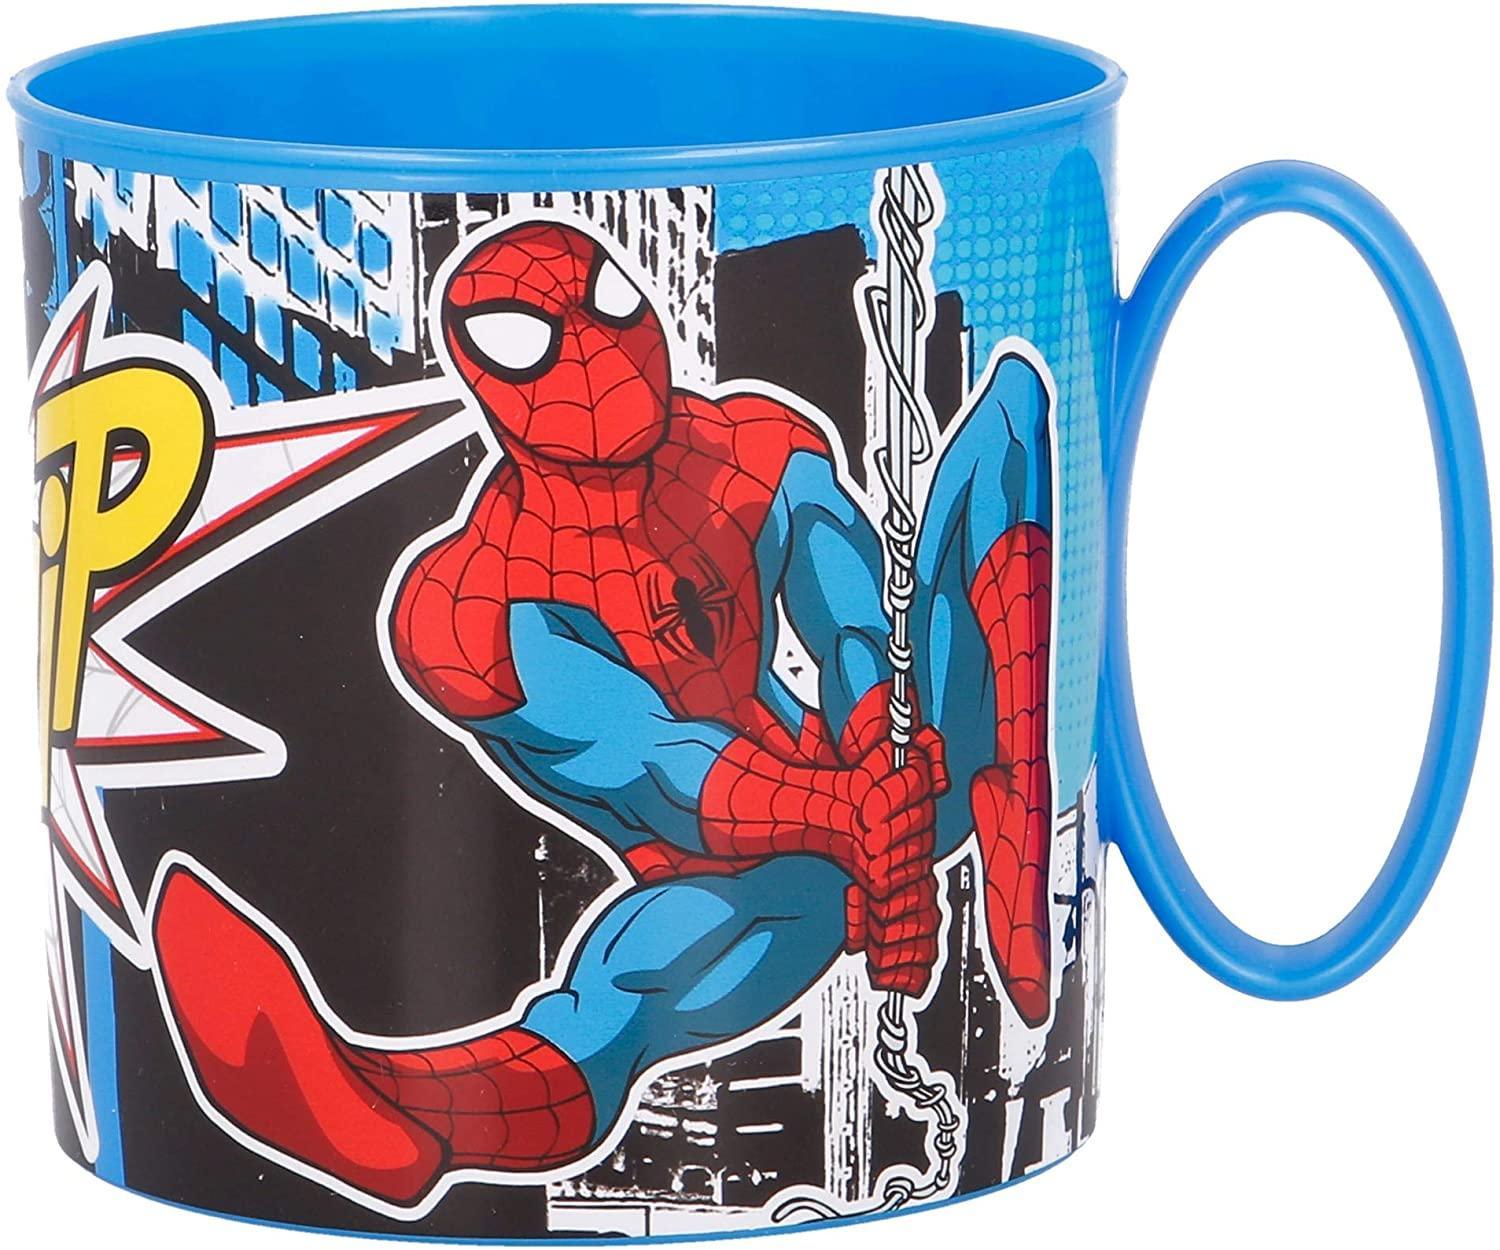 PUZZLEPARTY TAZZA IN PP SPIDERMAN